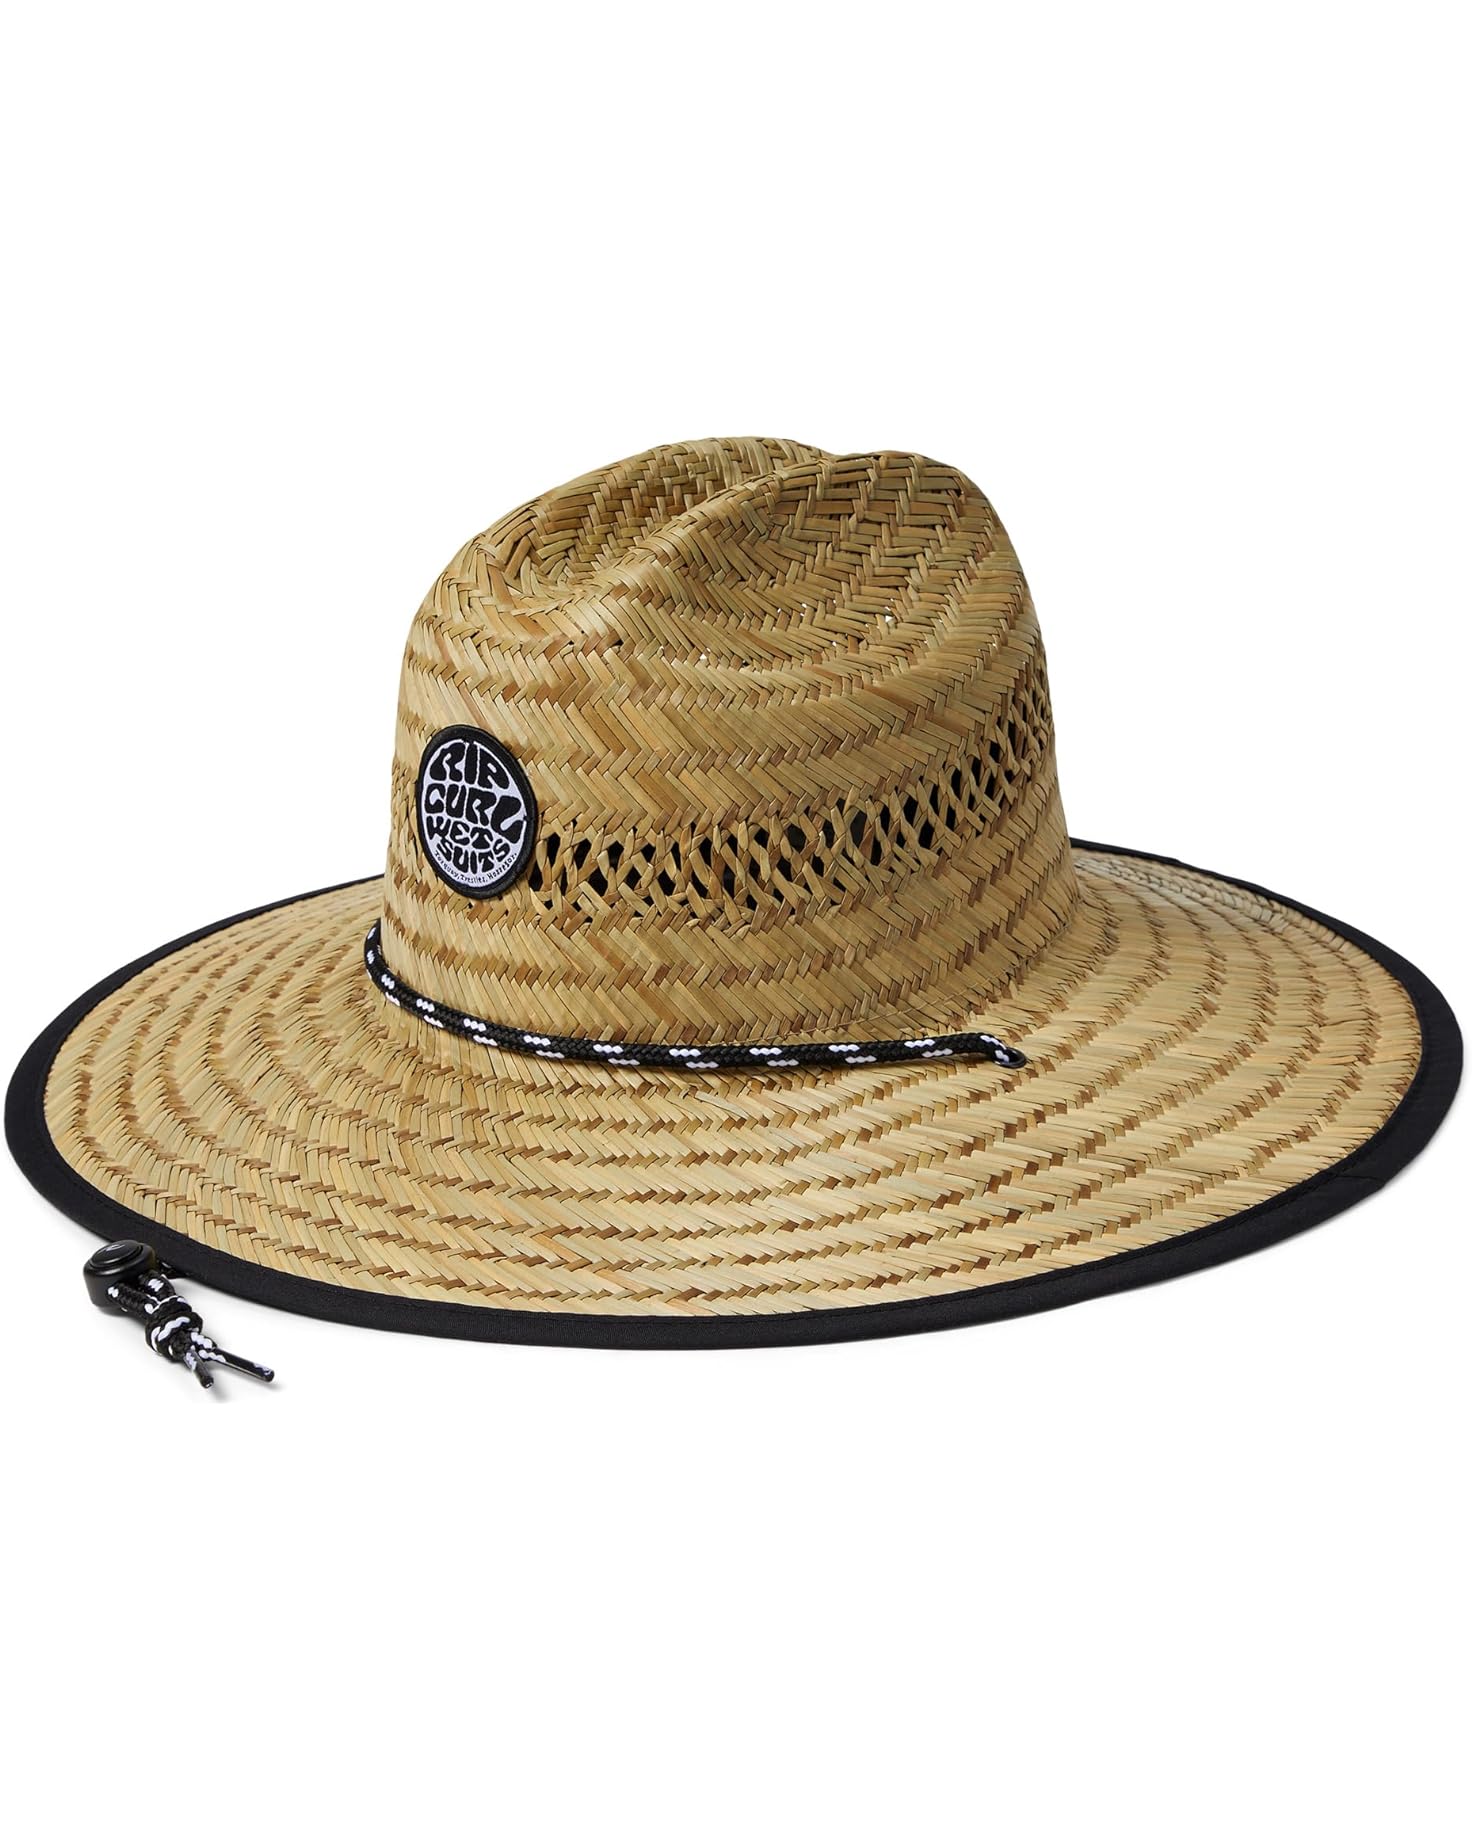 Rip Curl Logo Straw Hat (Size SM/MD or LG/XL) $10.78, Billabong Women's Straw Hat $11.96, More + Free Shipping